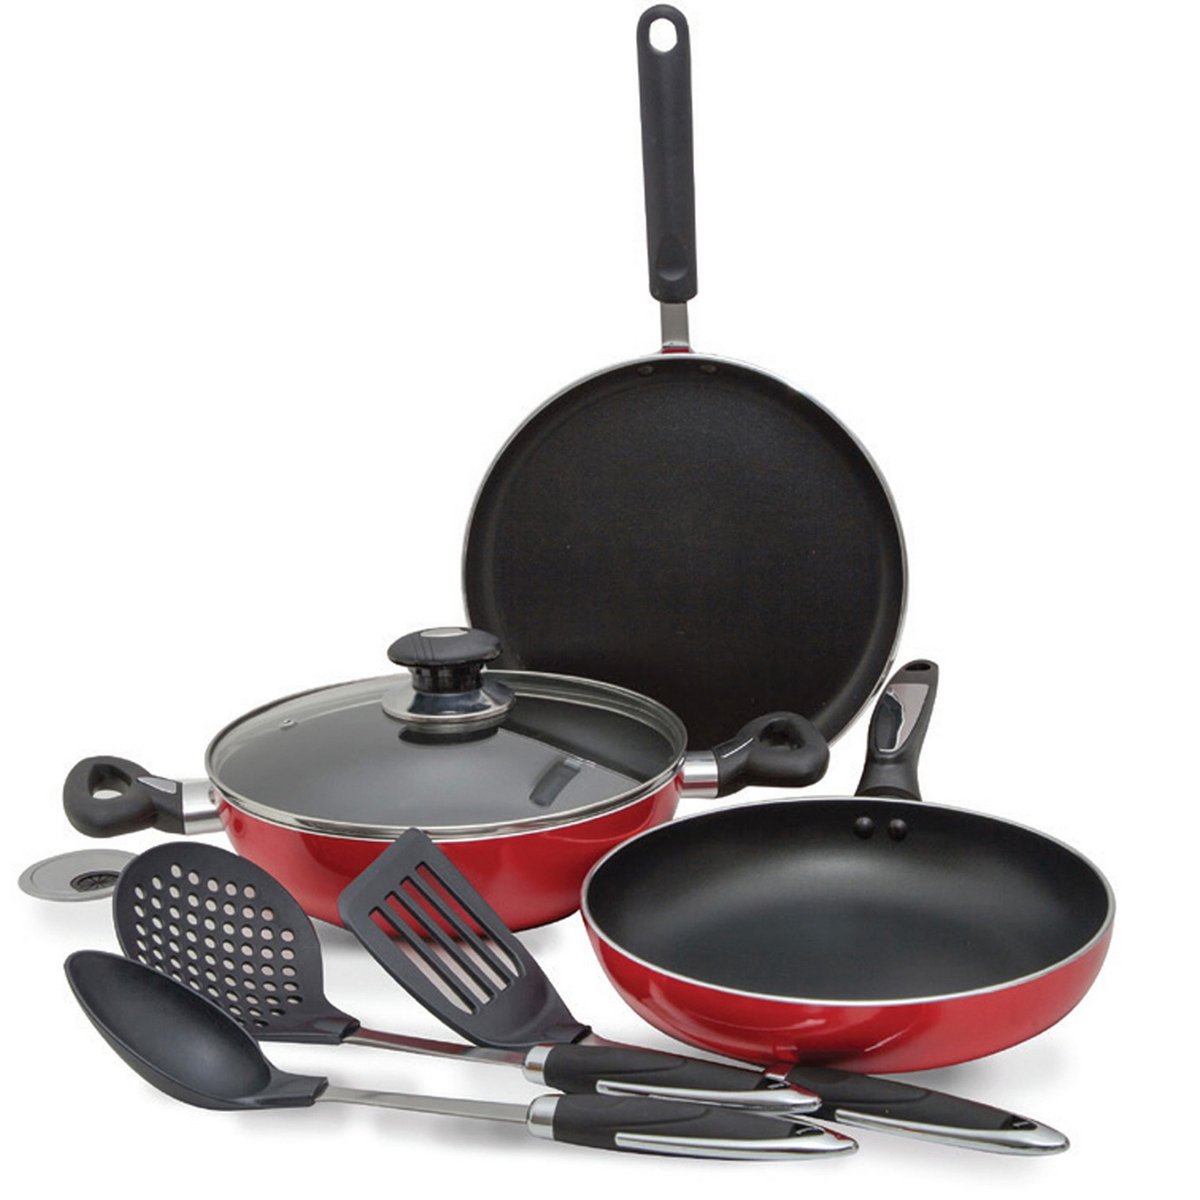 Chefline Induction Cookware Set 7pc